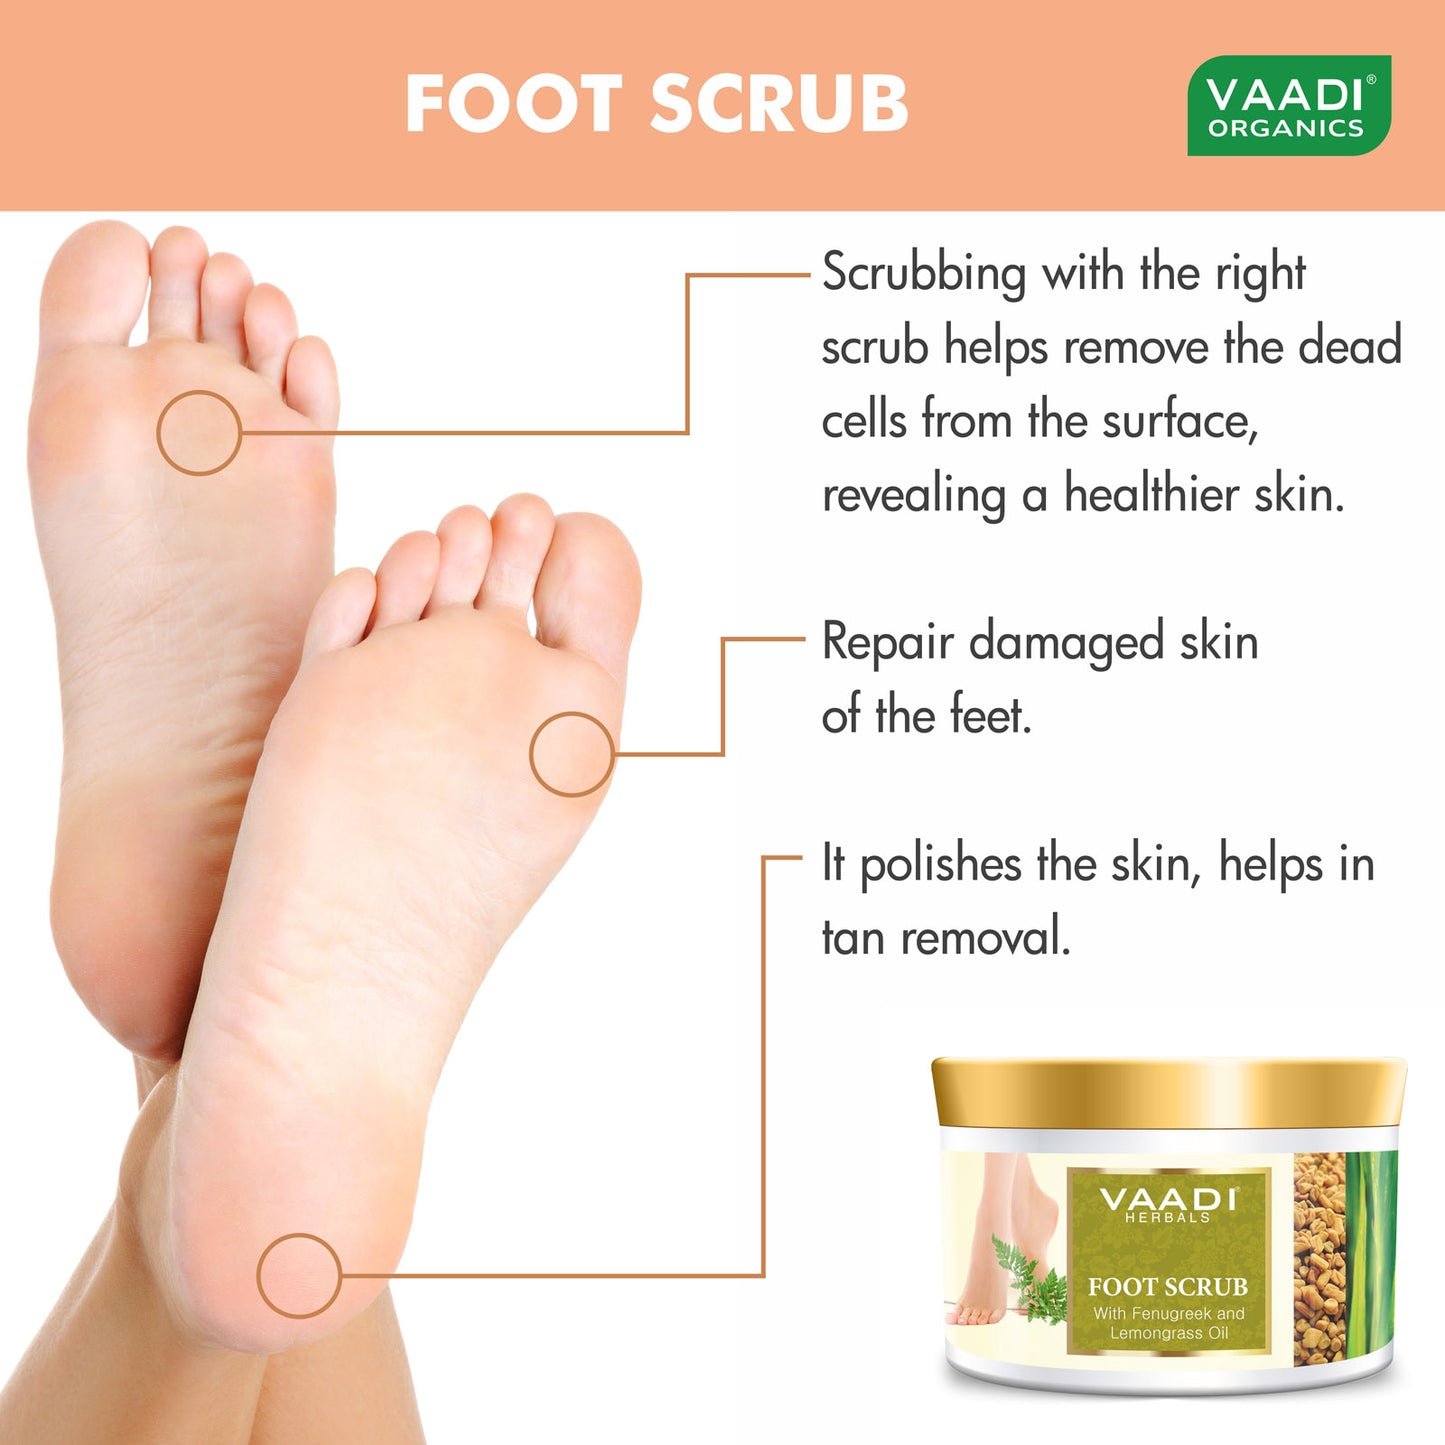 Foot Scrub With Fenugreek And Lemongrass Oil (500 gms)